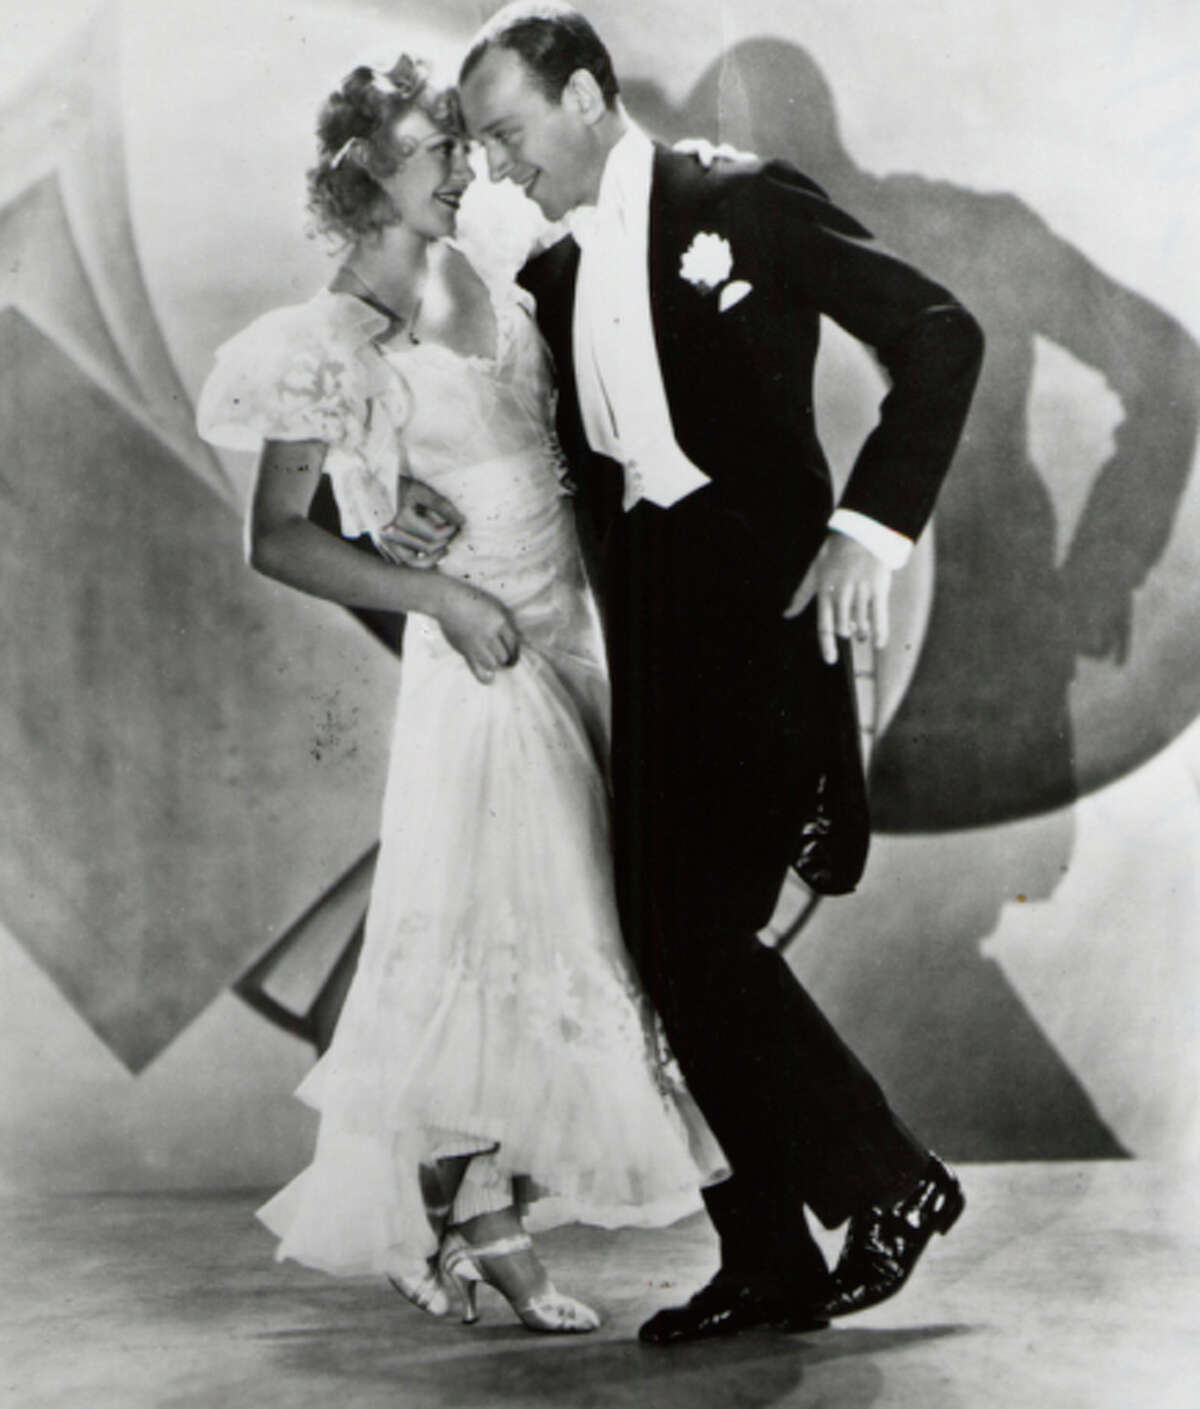 A good Fred Astaire film is any one with Ginger Rogers, such as “Flying down to Rio.”